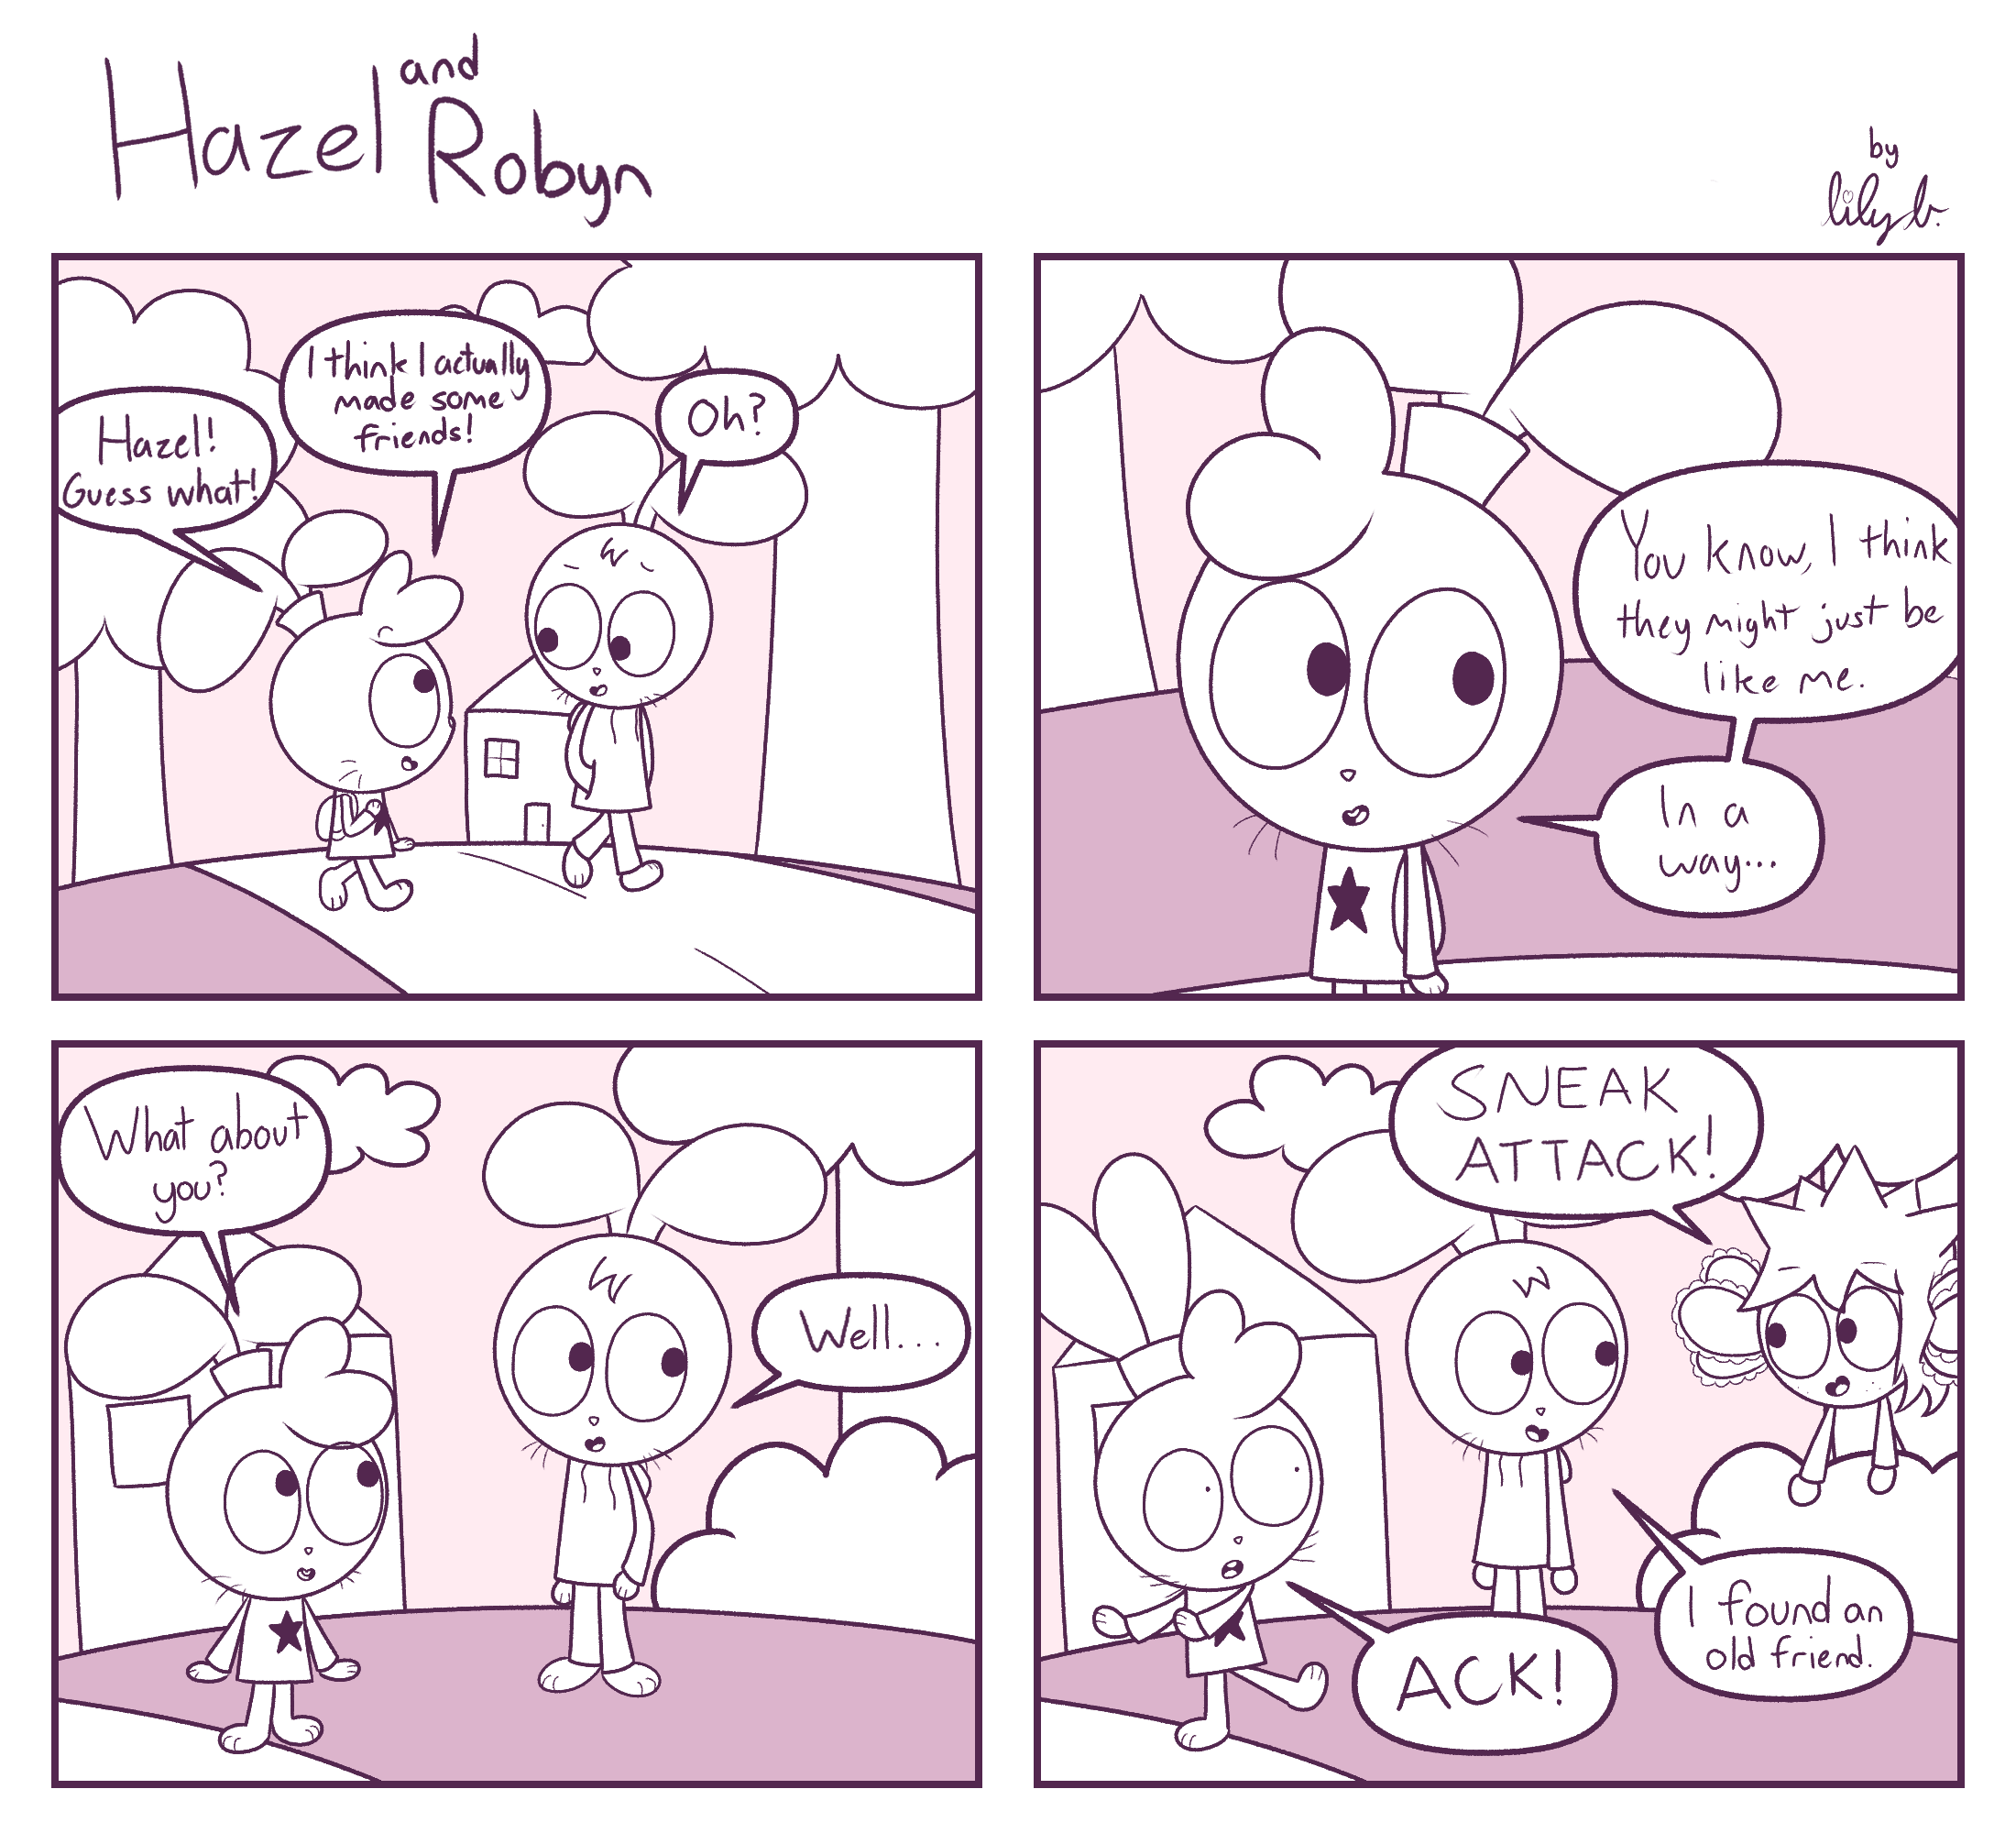 Panel 1: Robyn: Hazel! Guess what? I think I actually made some friends! / Hazel: Oh? | Panel 2: Robyn: You know, I think they might just be like me. In a way... | Panel 3: Robyn: What about you? / Hazel: Well... | Panel 4: Tapioca: [jumps out from a bush] SNEAK ATTACK! / Robyn: ACK! / Hazel: I found an old friend.